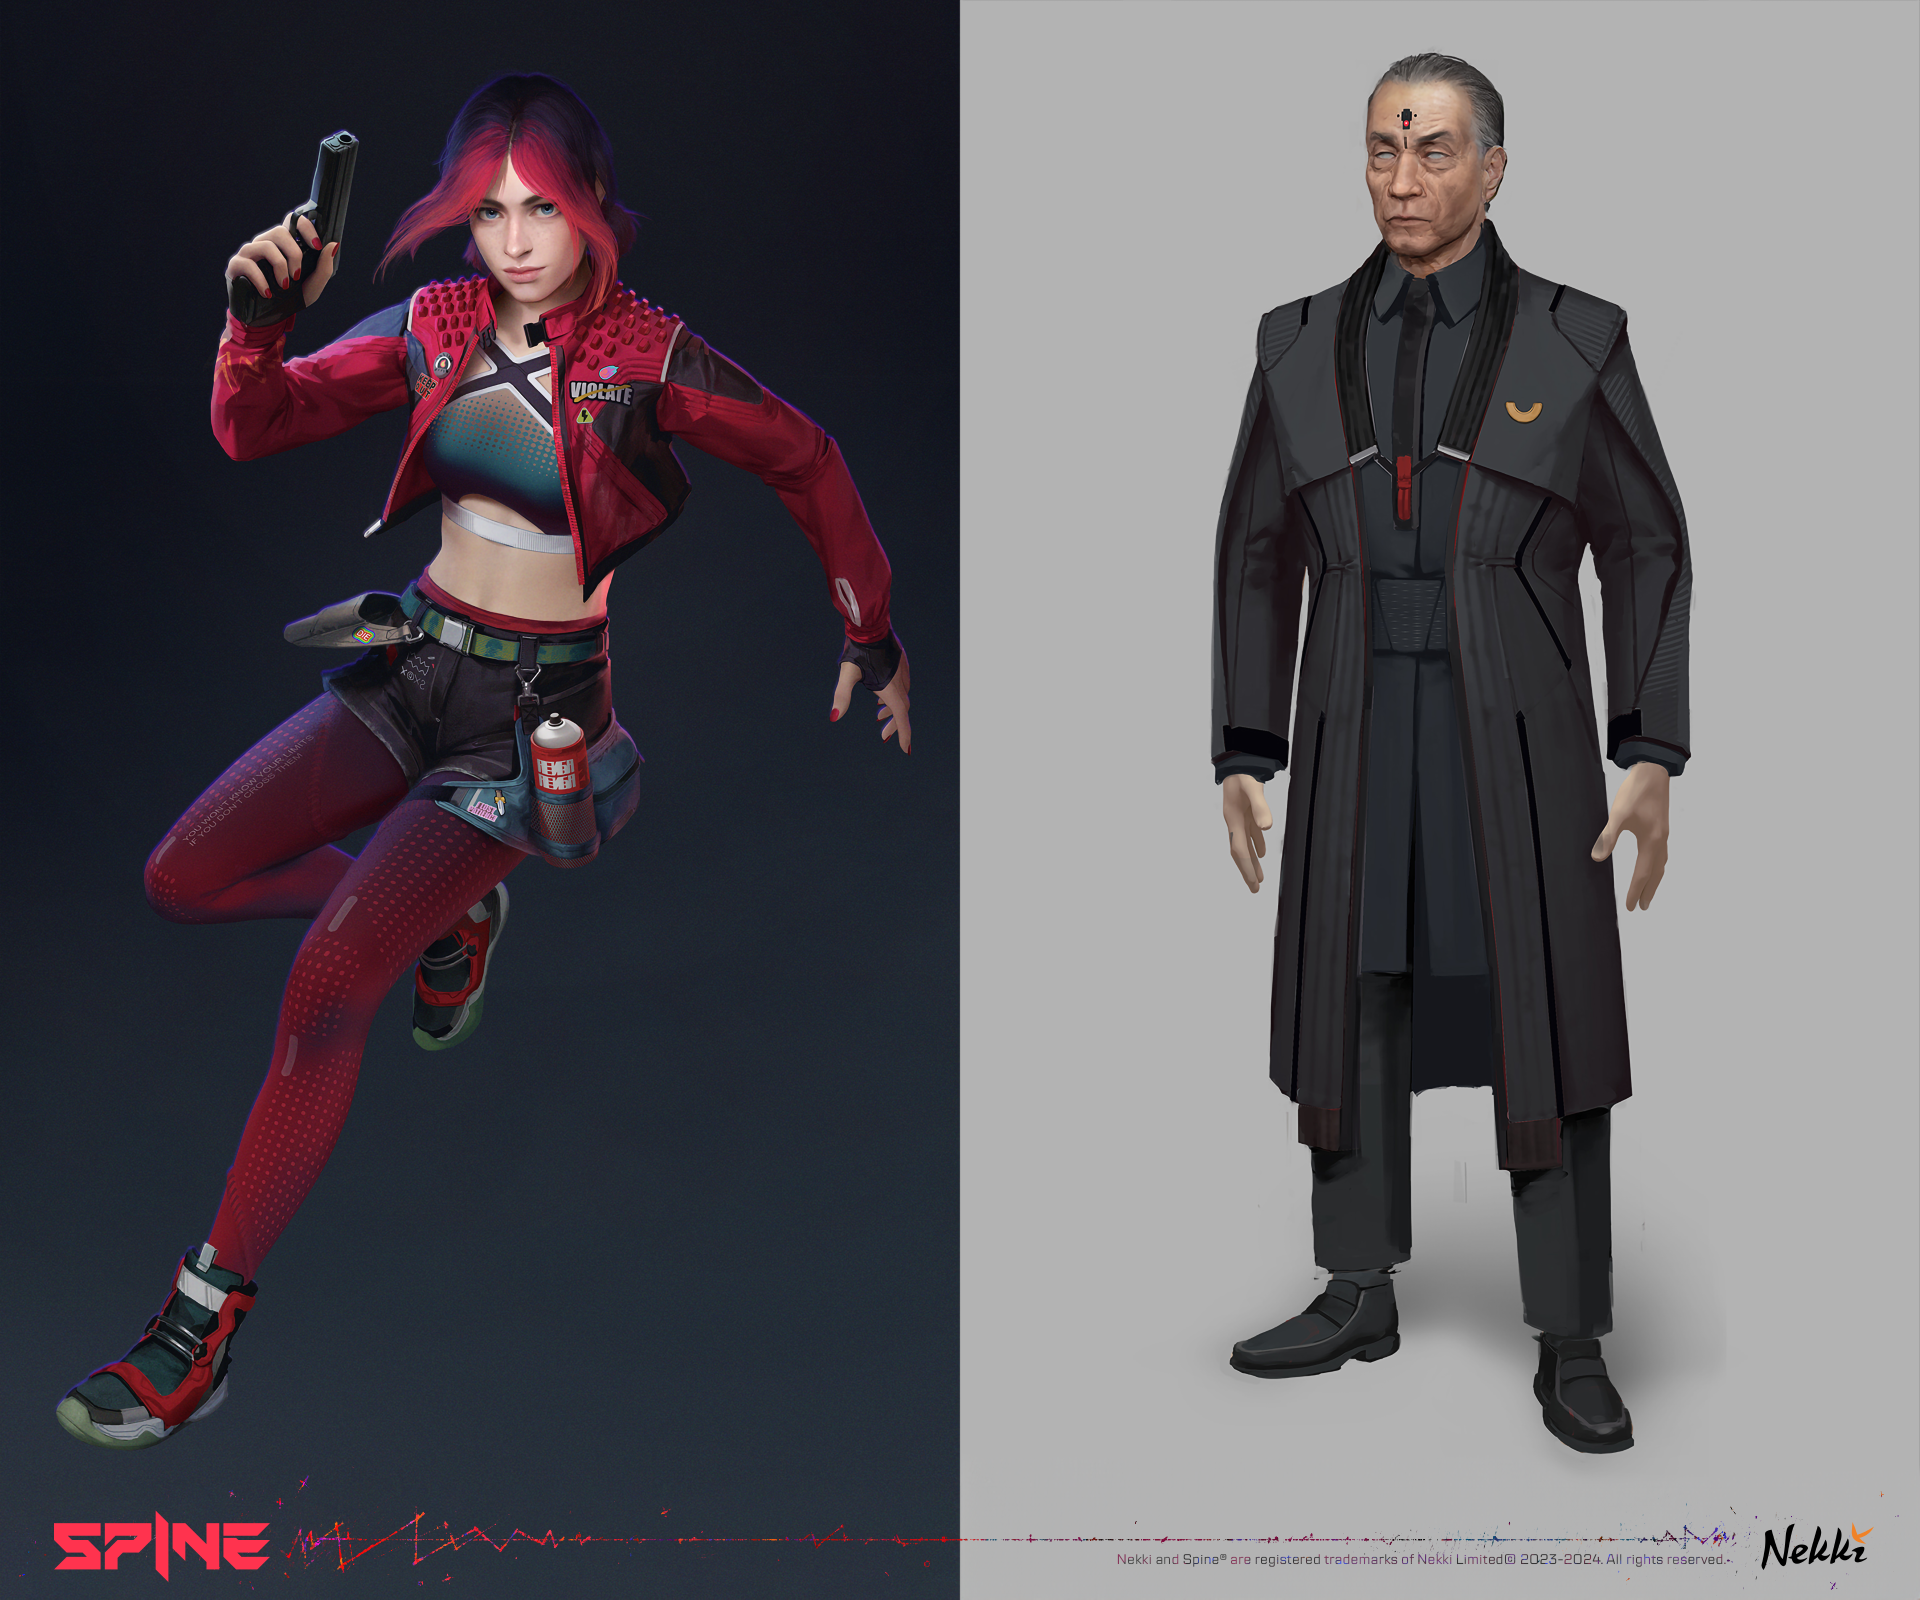 Creating video game SPINE using Unreal Engine 5; character concept art for Spine